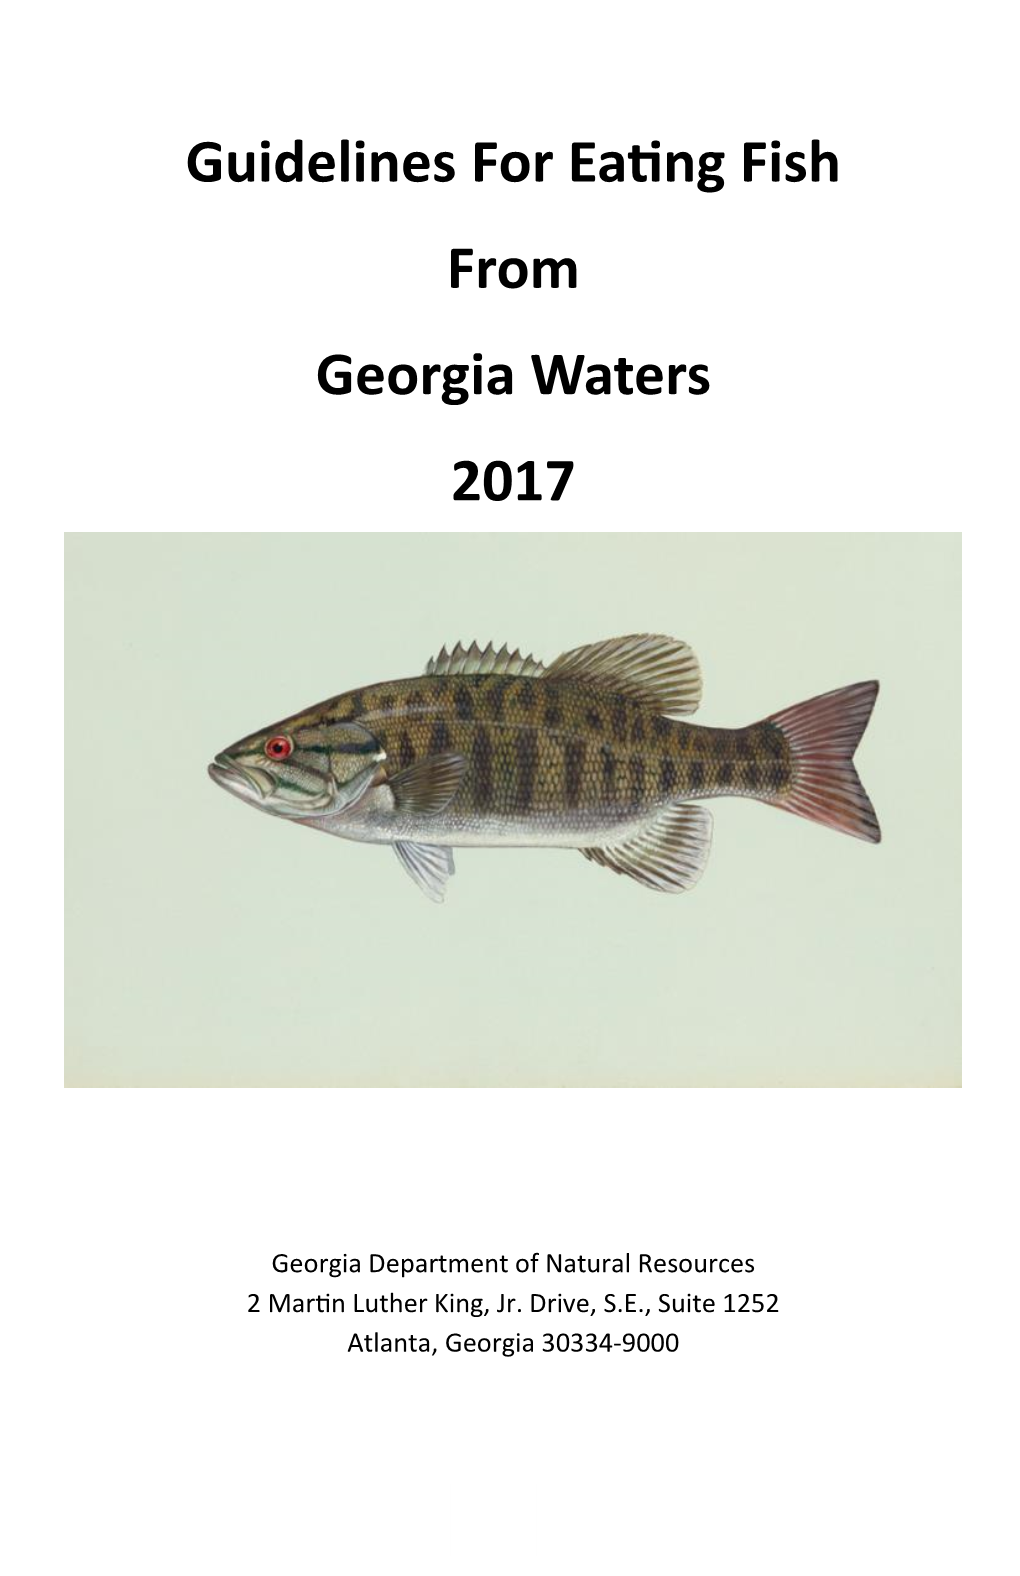 Guidelines for Eating Fish from Georgia Waters 2017